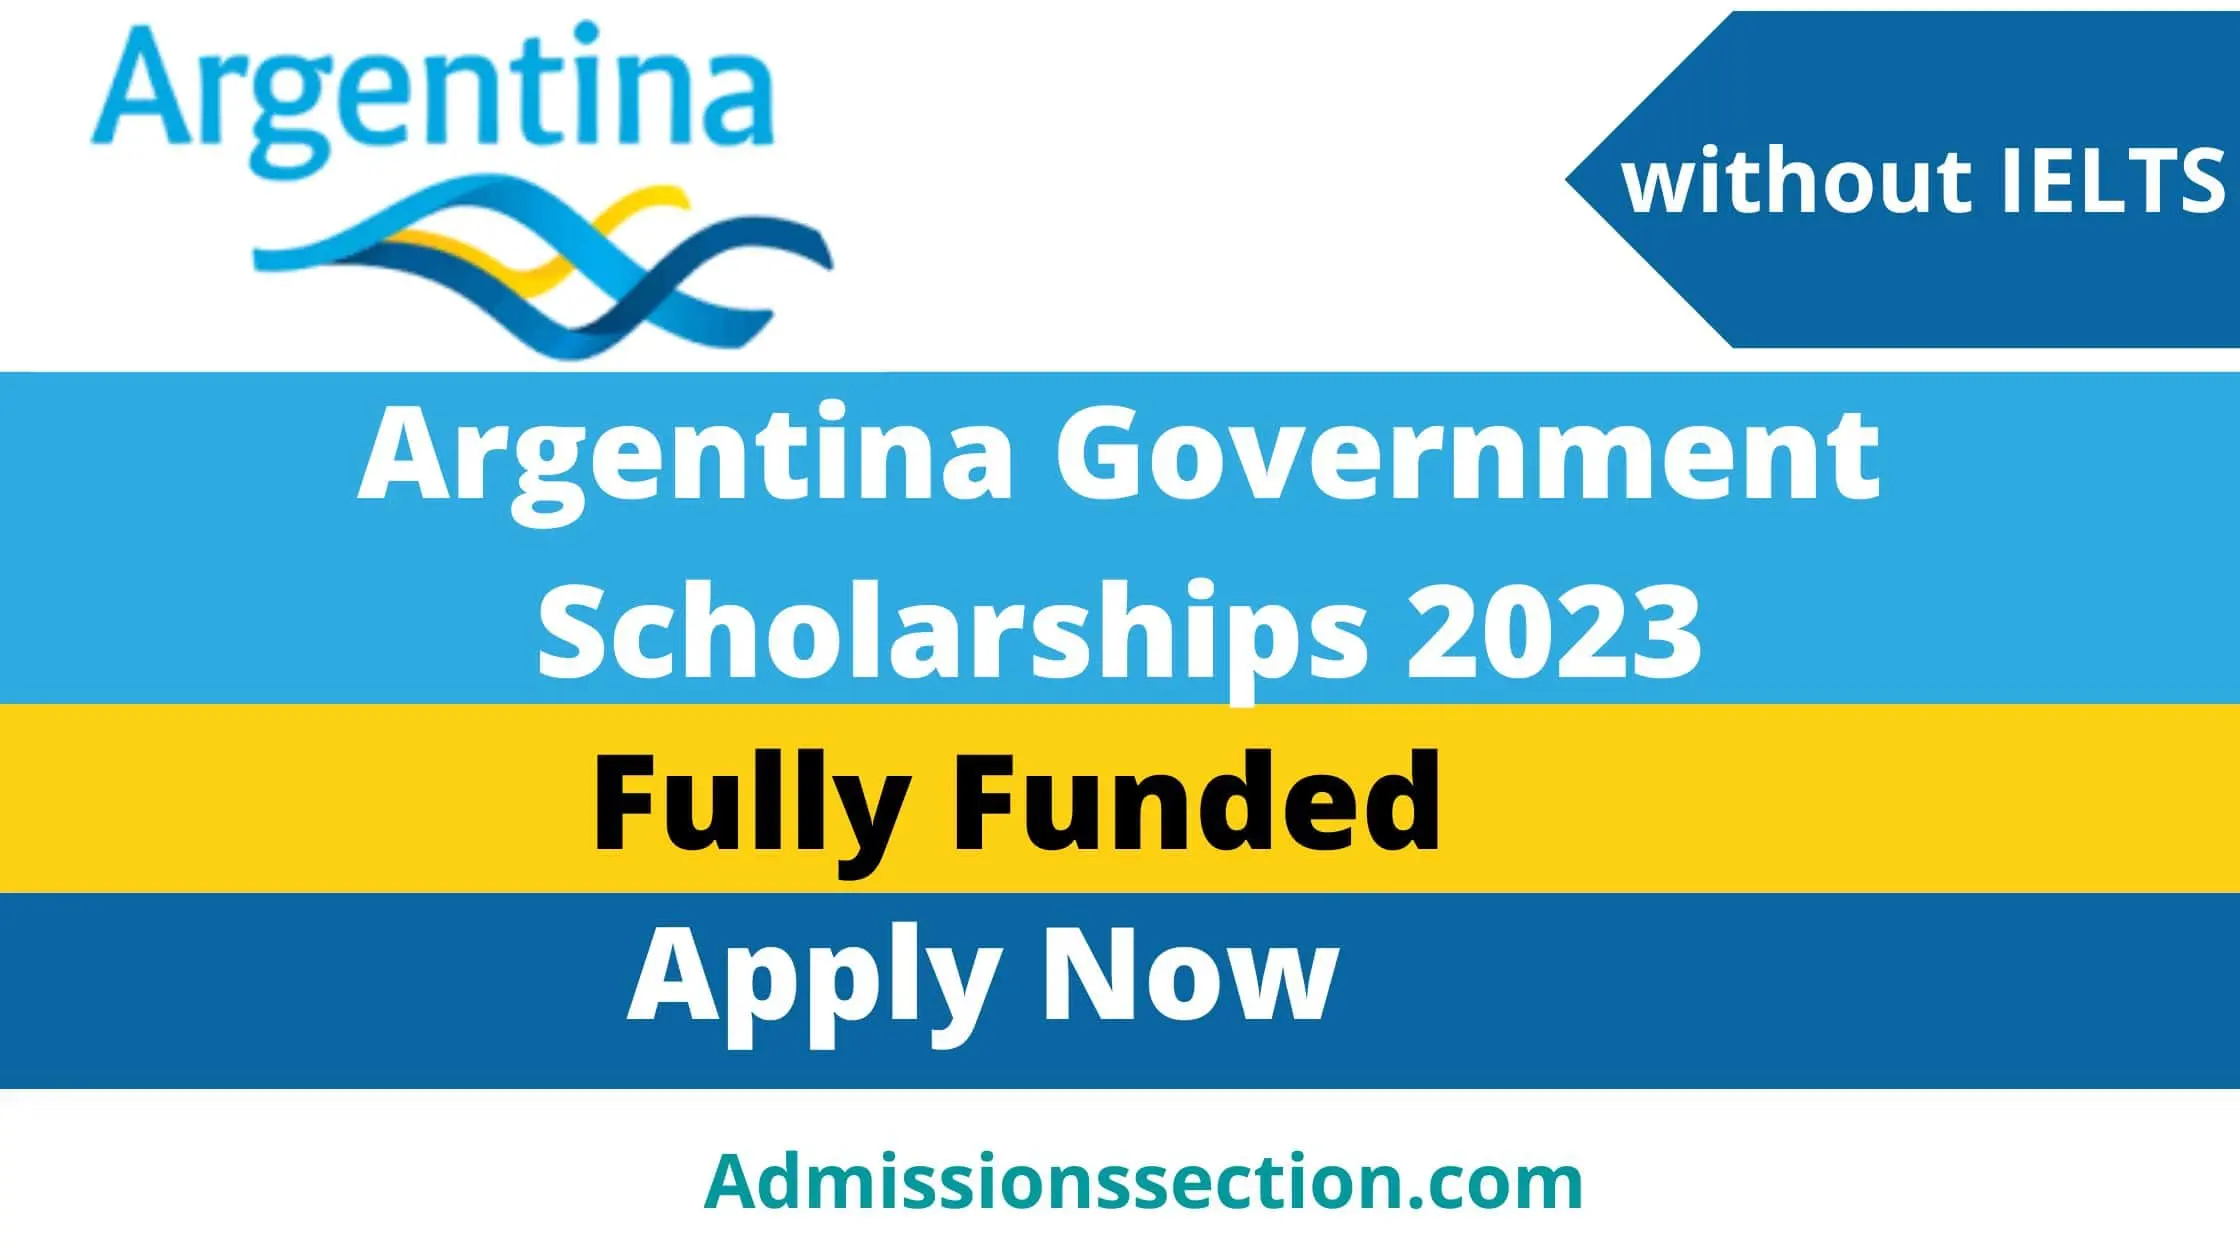 Argentina Government Scholarships 2023 Without IELTS